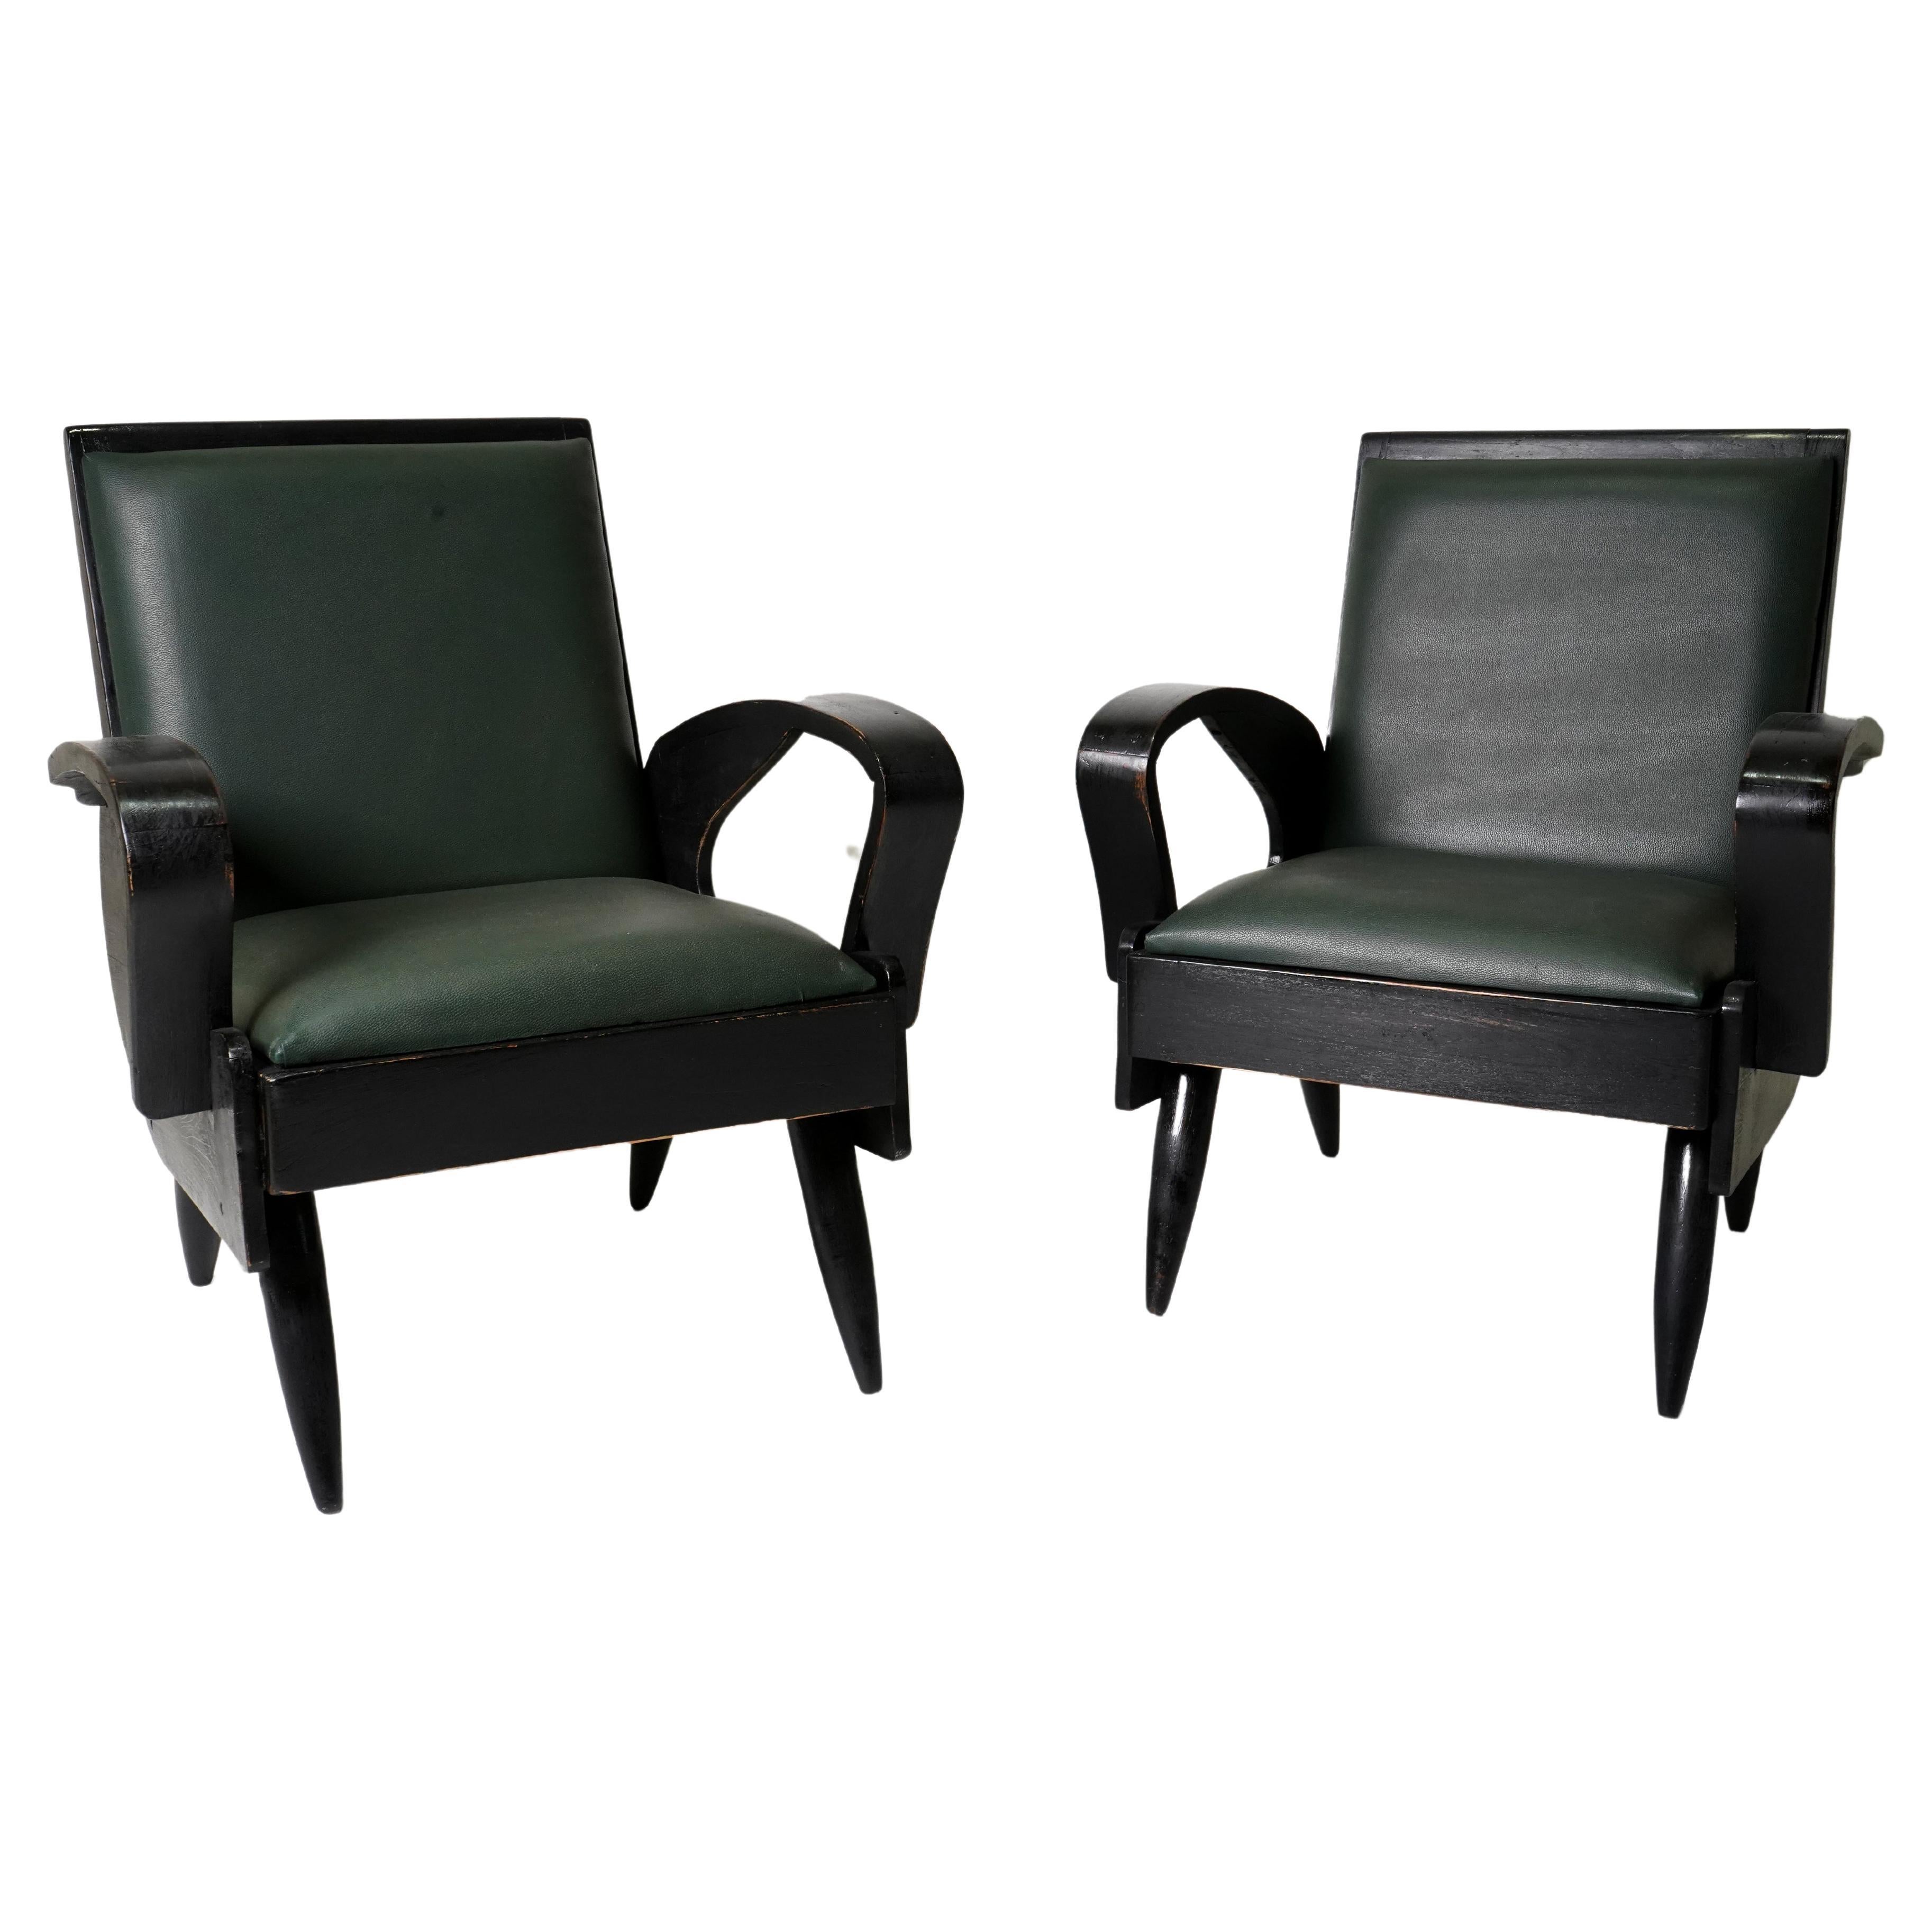 Rare Pair of 1950's Modern Anglo-Indian  Arm Chairs For Sale